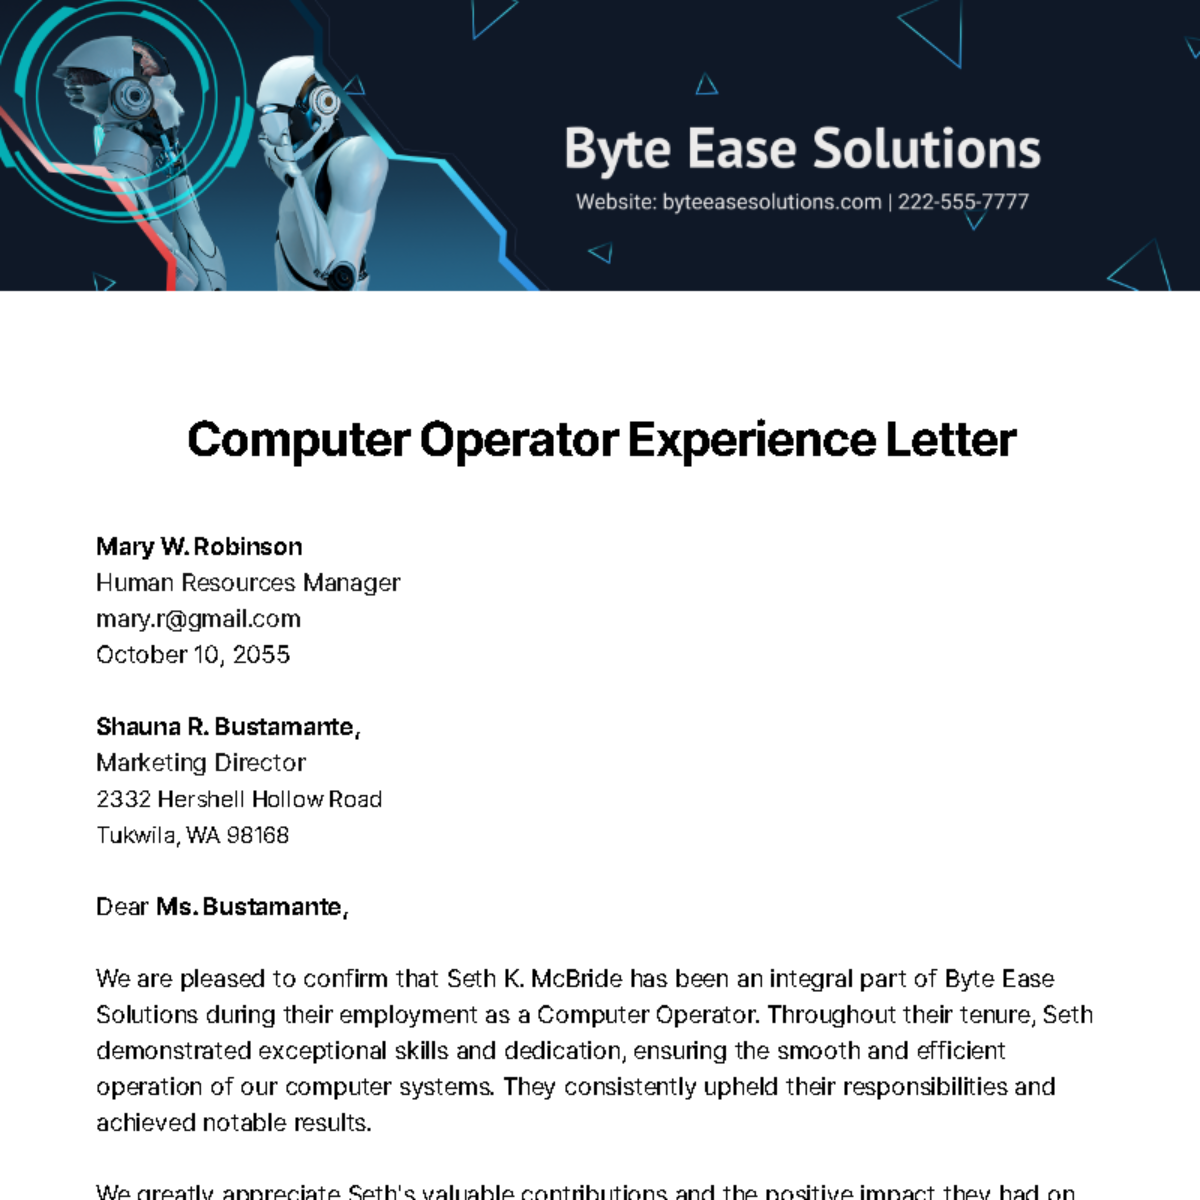 Computer Operator Experience Letter   Template